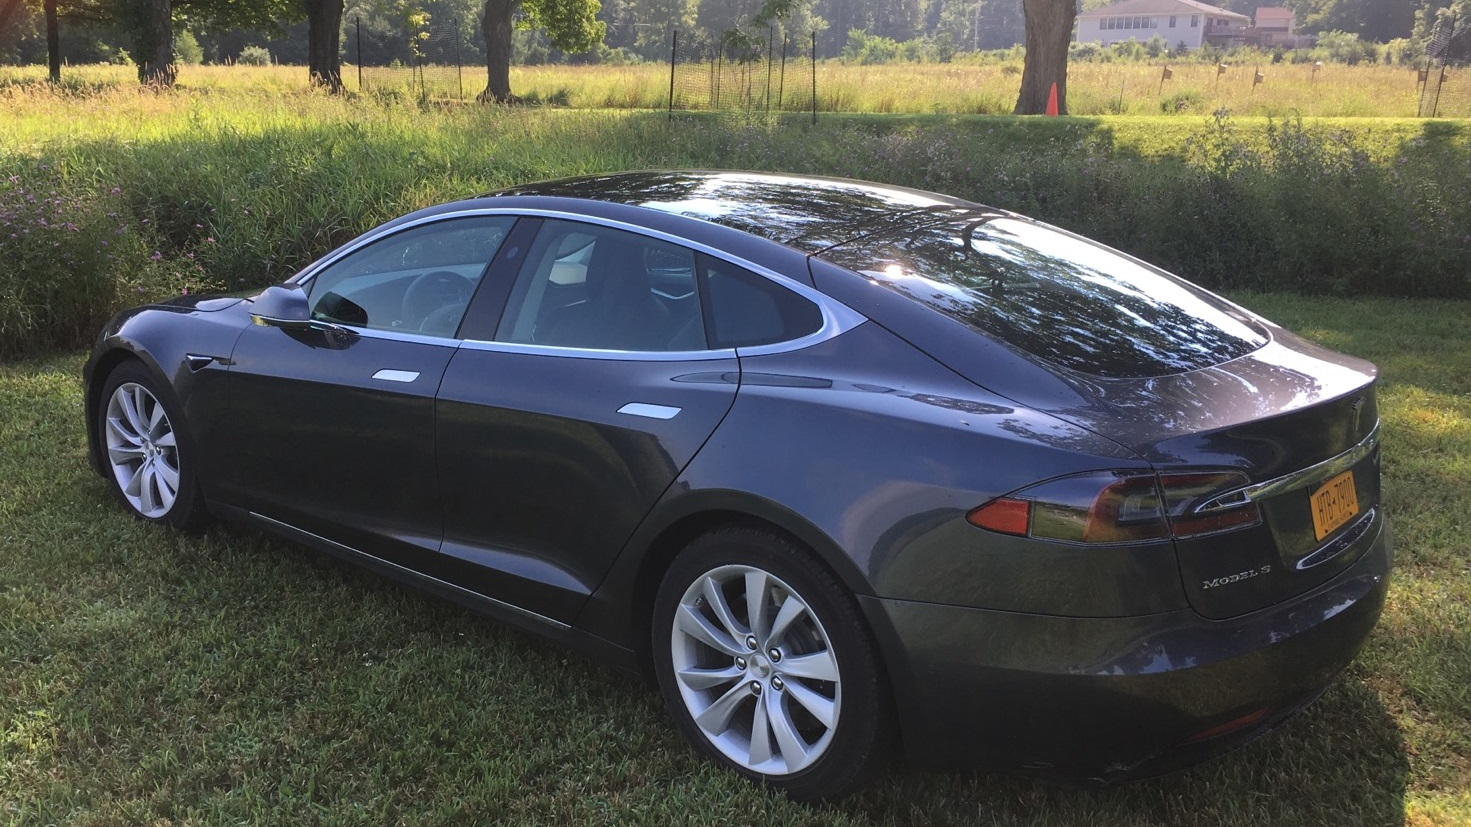 climax afgunst Consumeren Life with Tesla Model S: assessing my new 100D vs old 2013 electric car